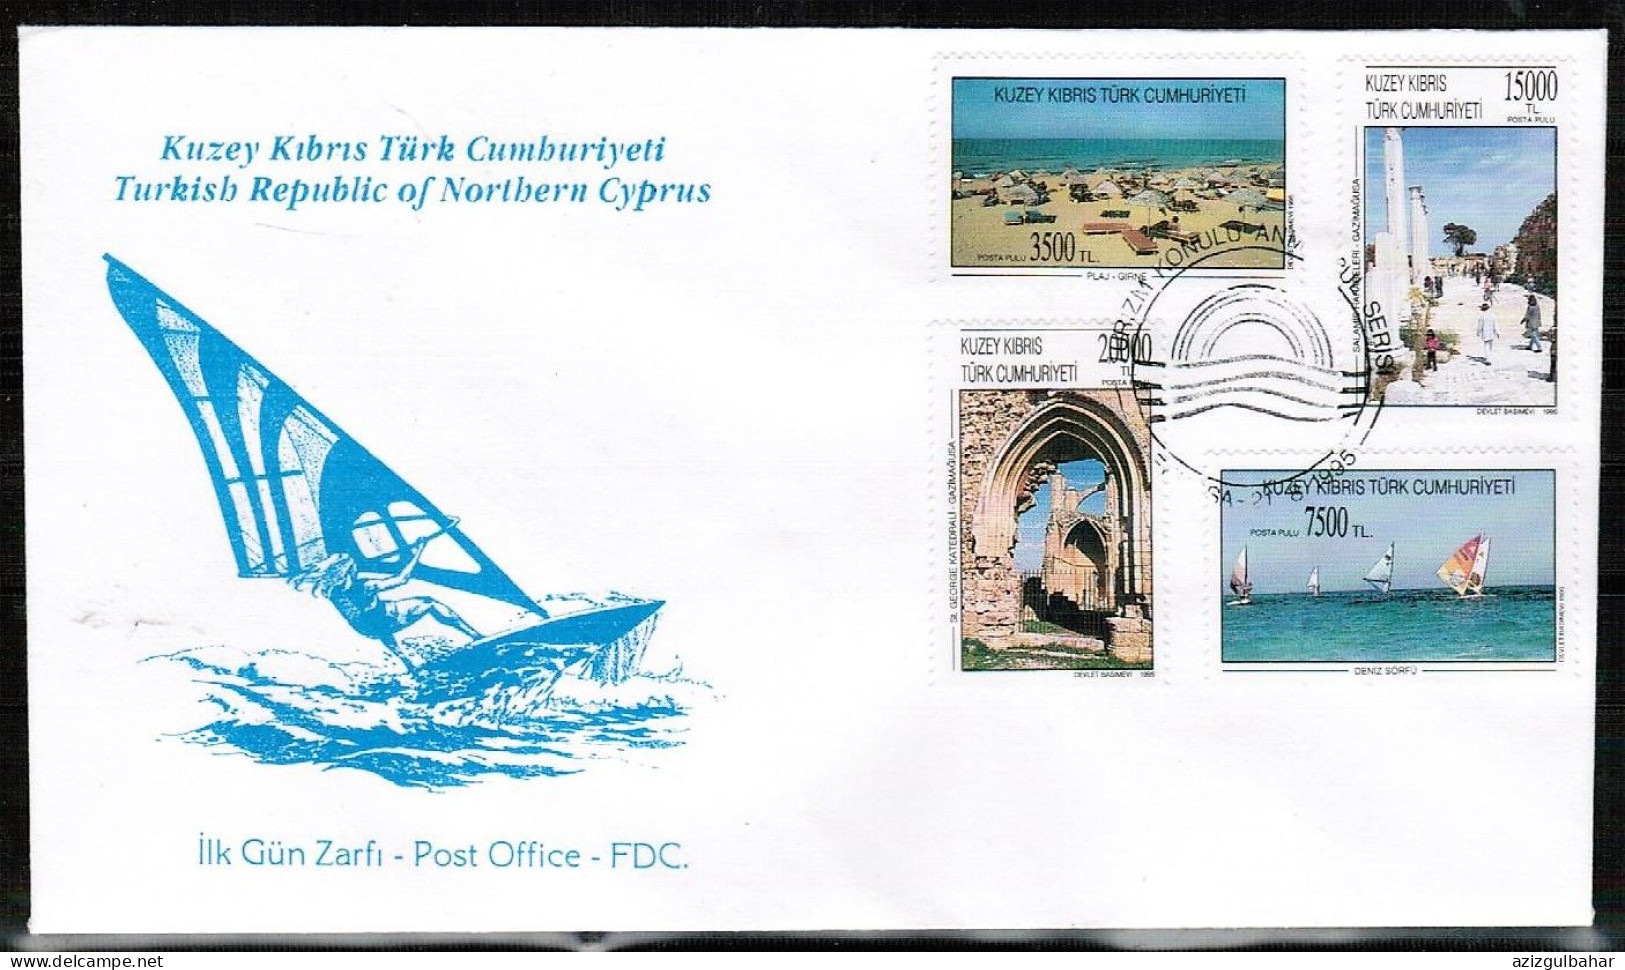 1995 - TOURISM - TURKISH CYPRIOT STAMPS - FDC - Used Stamps